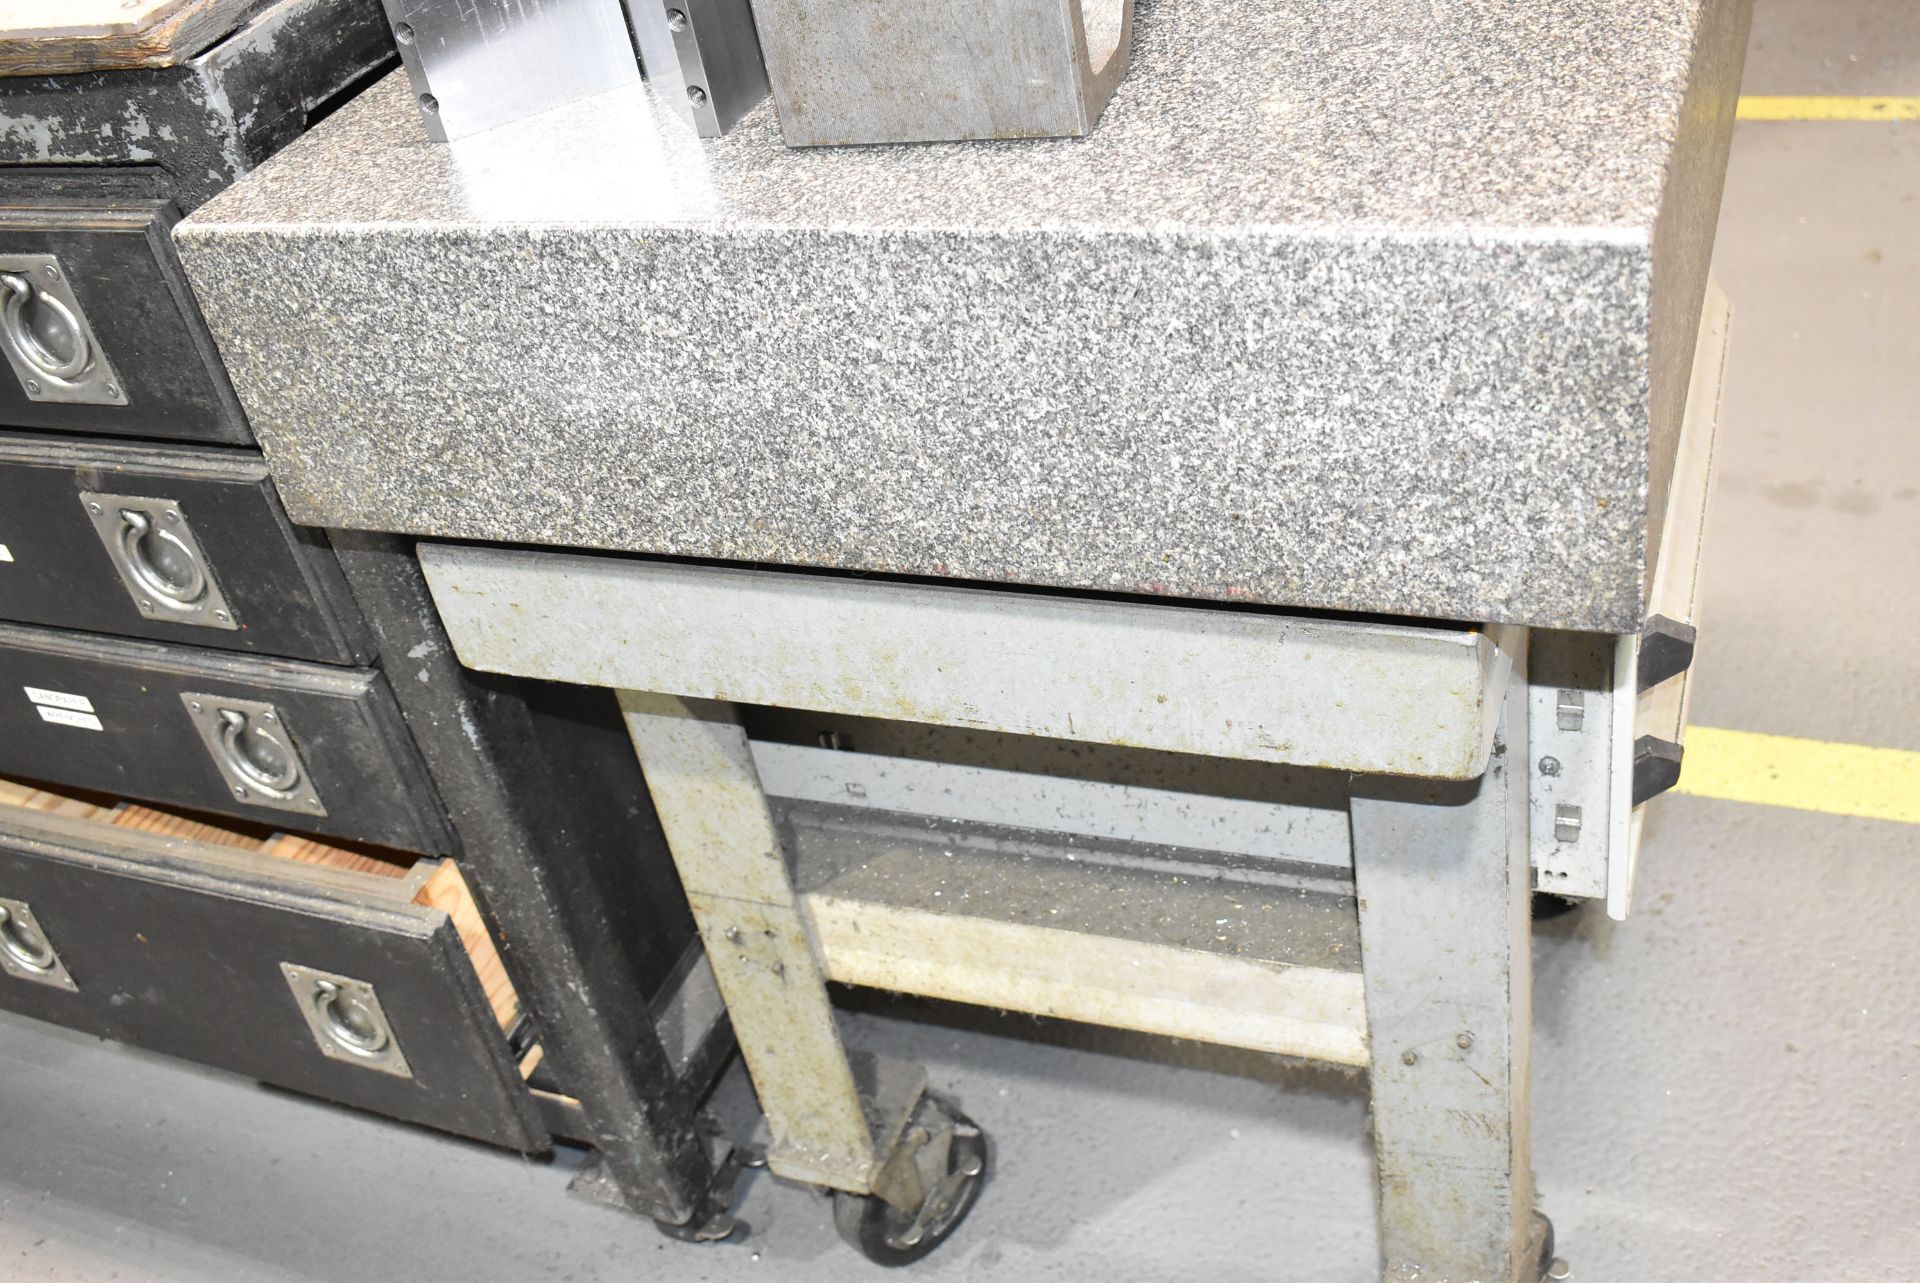 MFG UNKNOWN 24" X 36" X 6" GRANITE SURFACE PLATE WITH ROLLING STAND, S/N N/A - Image 2 of 2